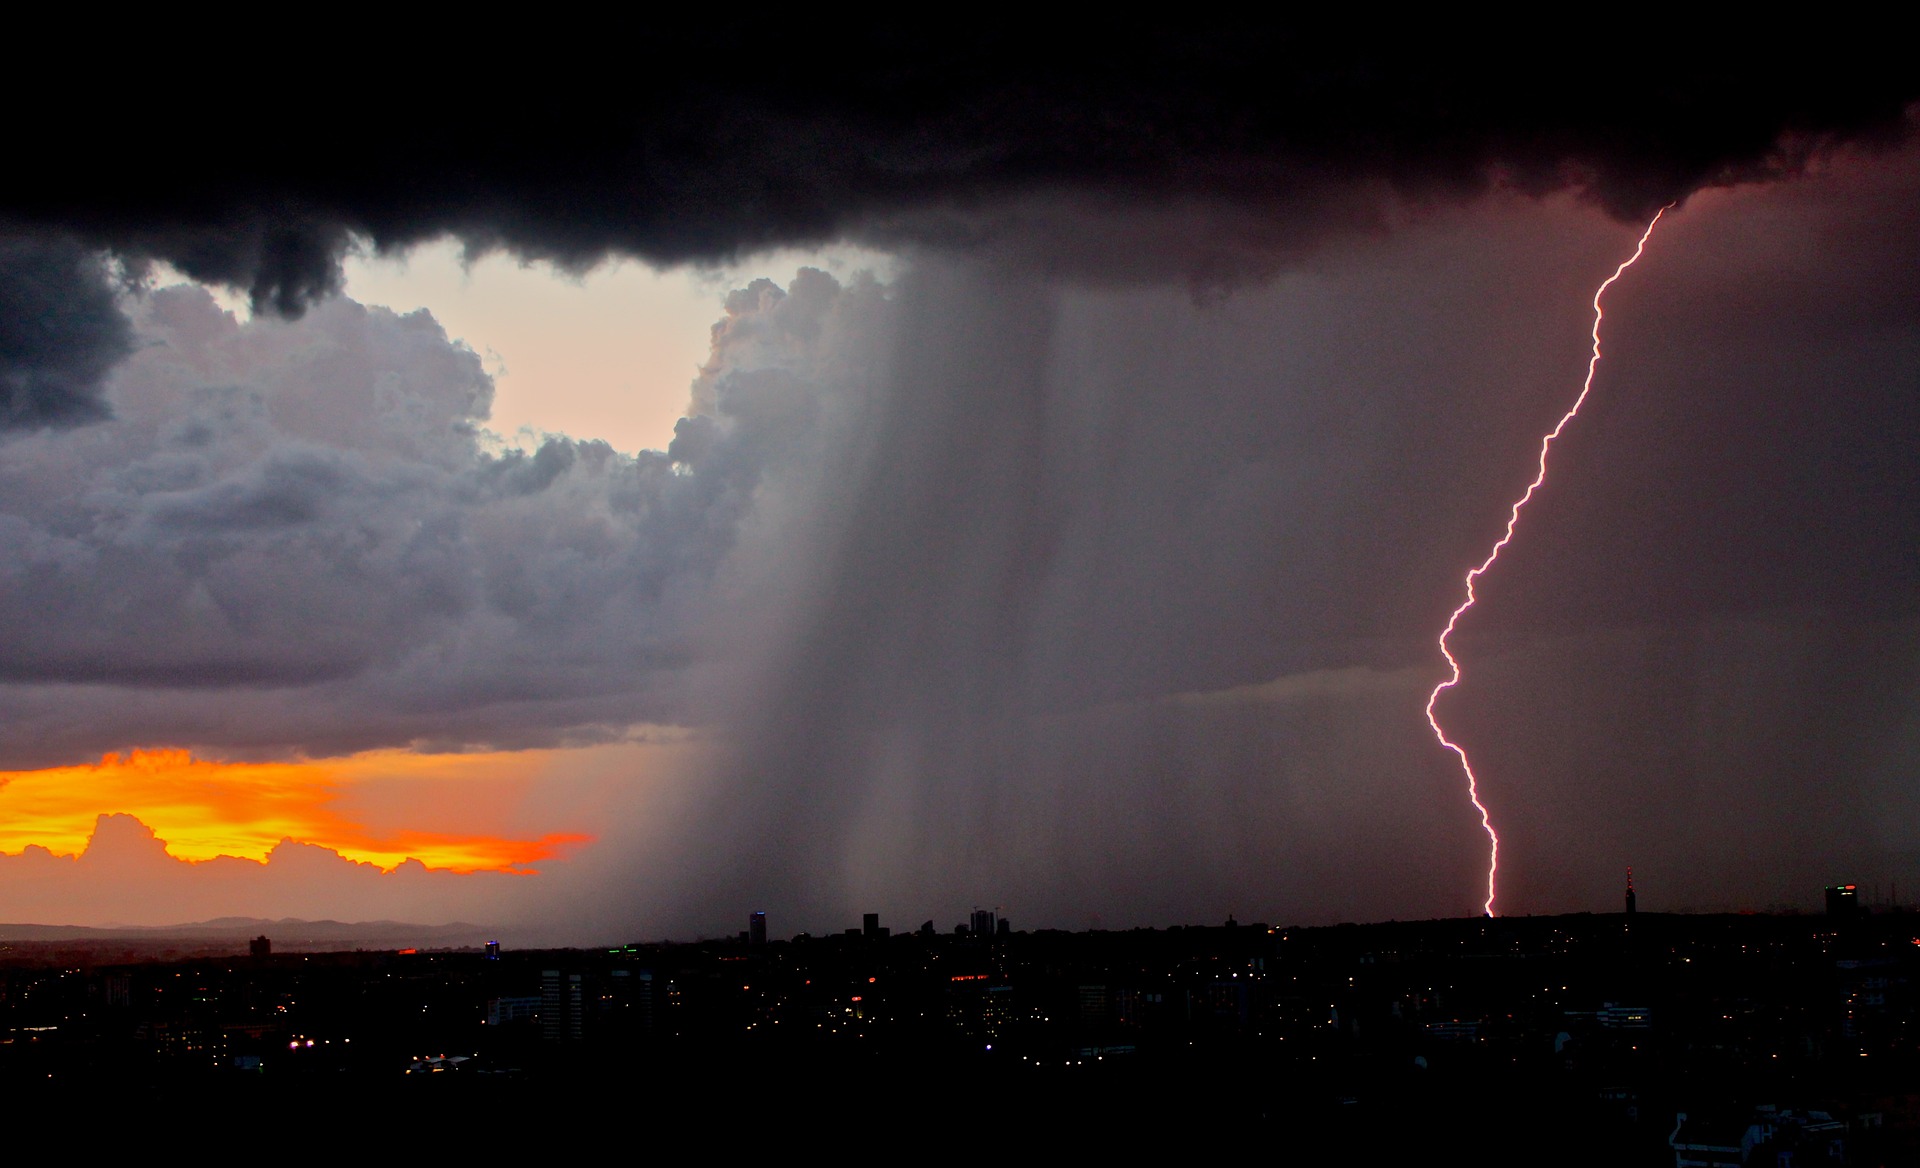 What makes a thunderstorm severe?